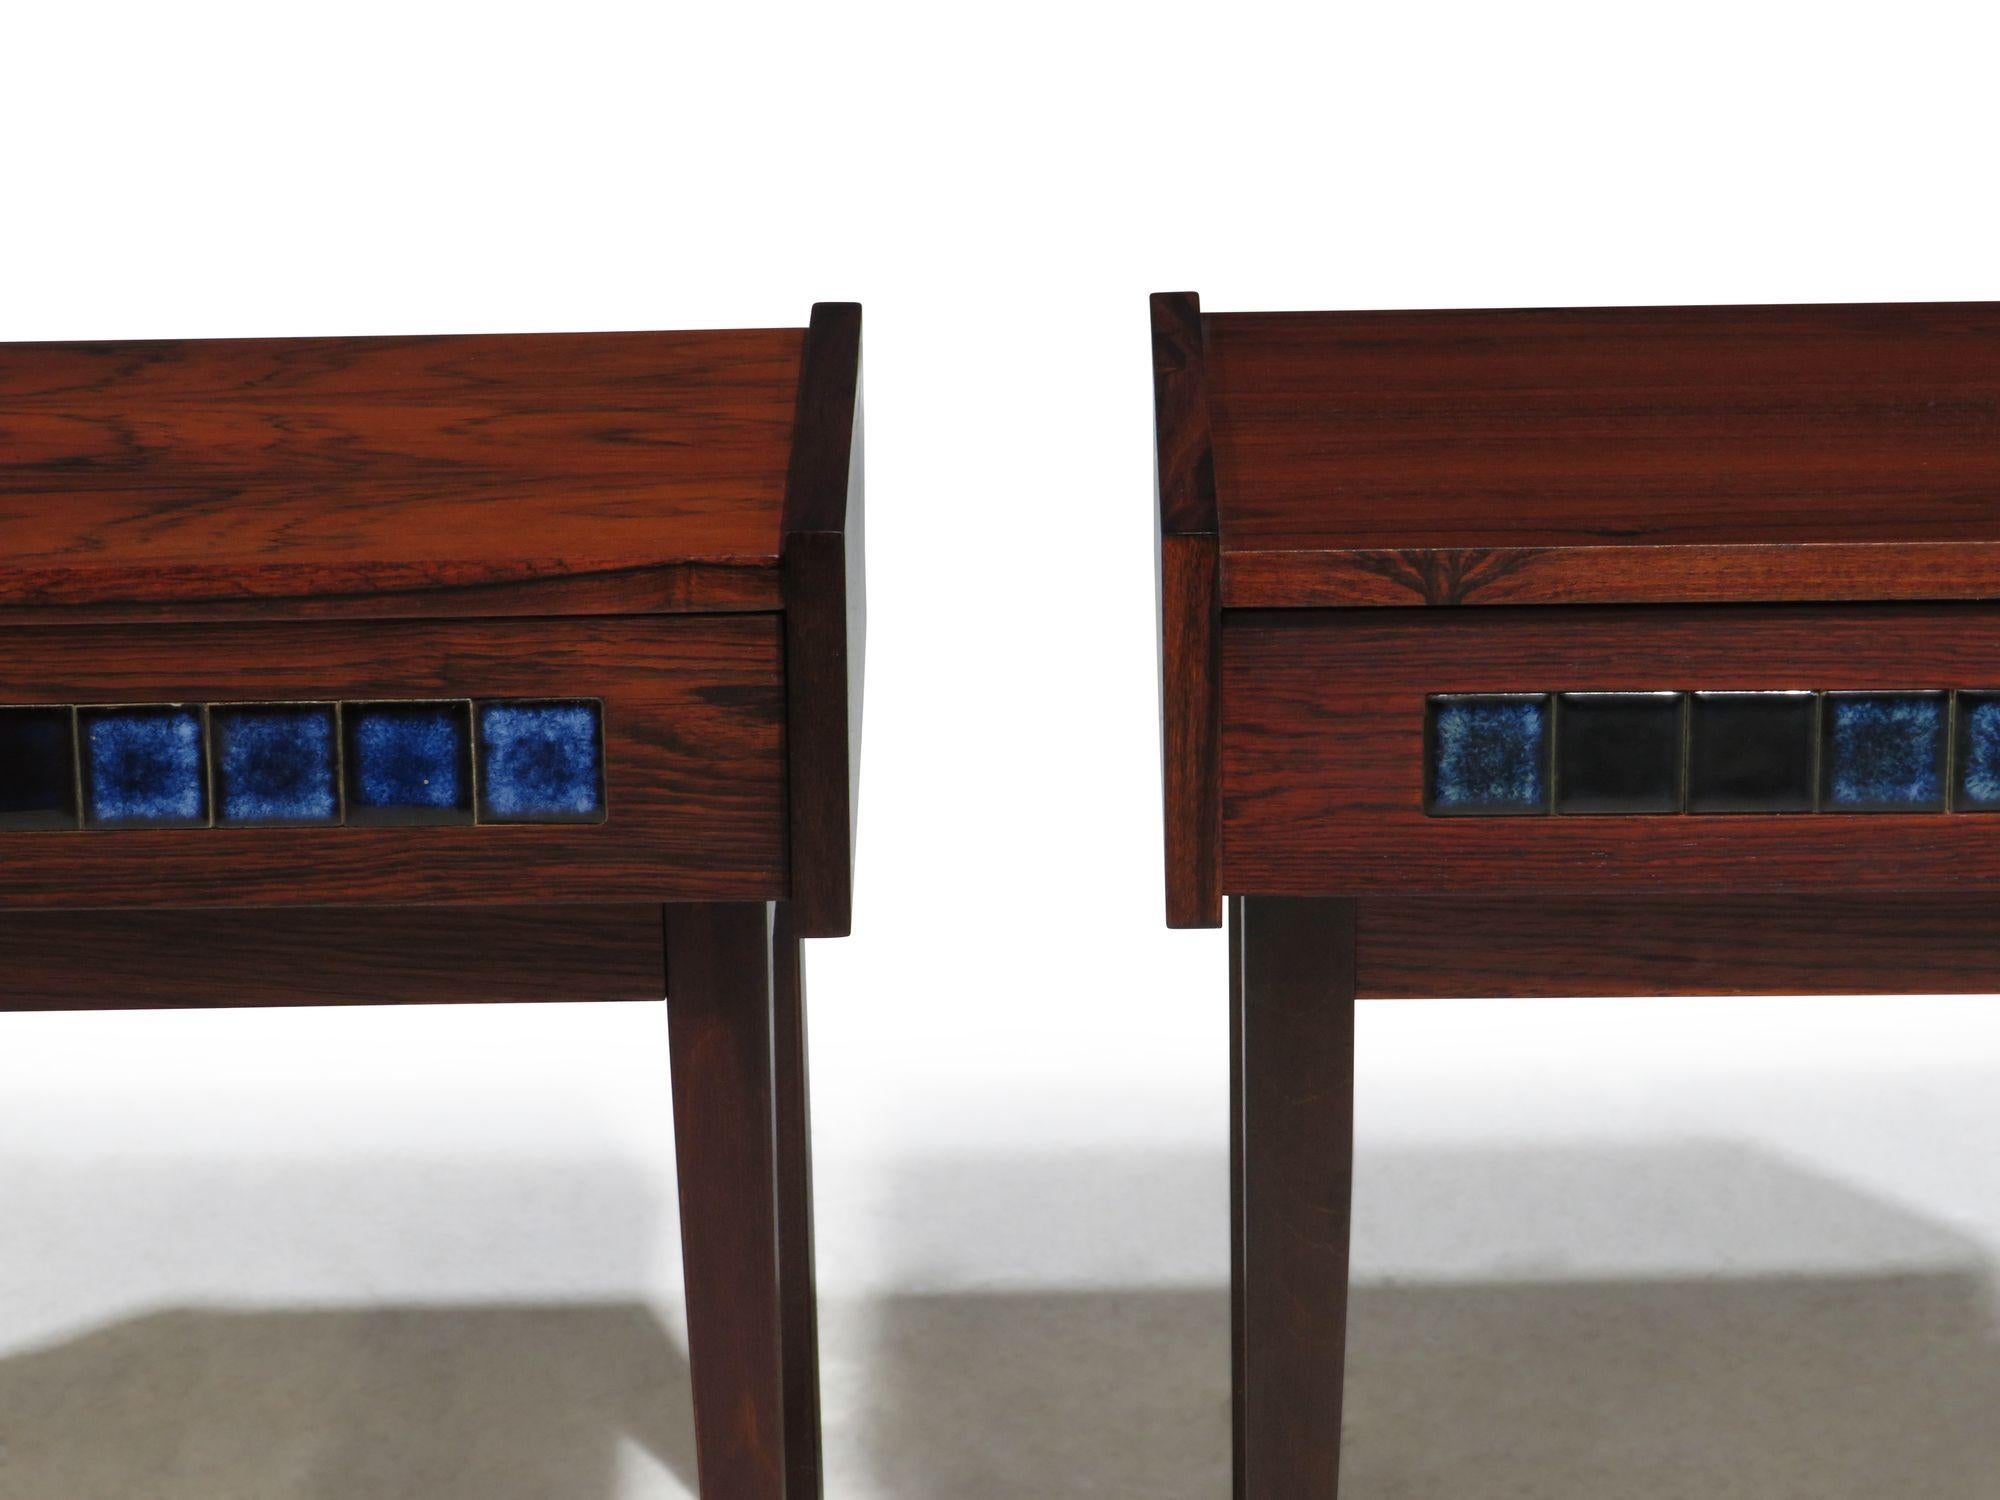 Pair of Scandinavian nightstands made in Denmark, circa 1965. The nightstands are crafted of Brazilian Rosewood and feature one drawers with blue ceramic tile details. Raised on tapered legs. Nightstands are fully restored in excellent condition